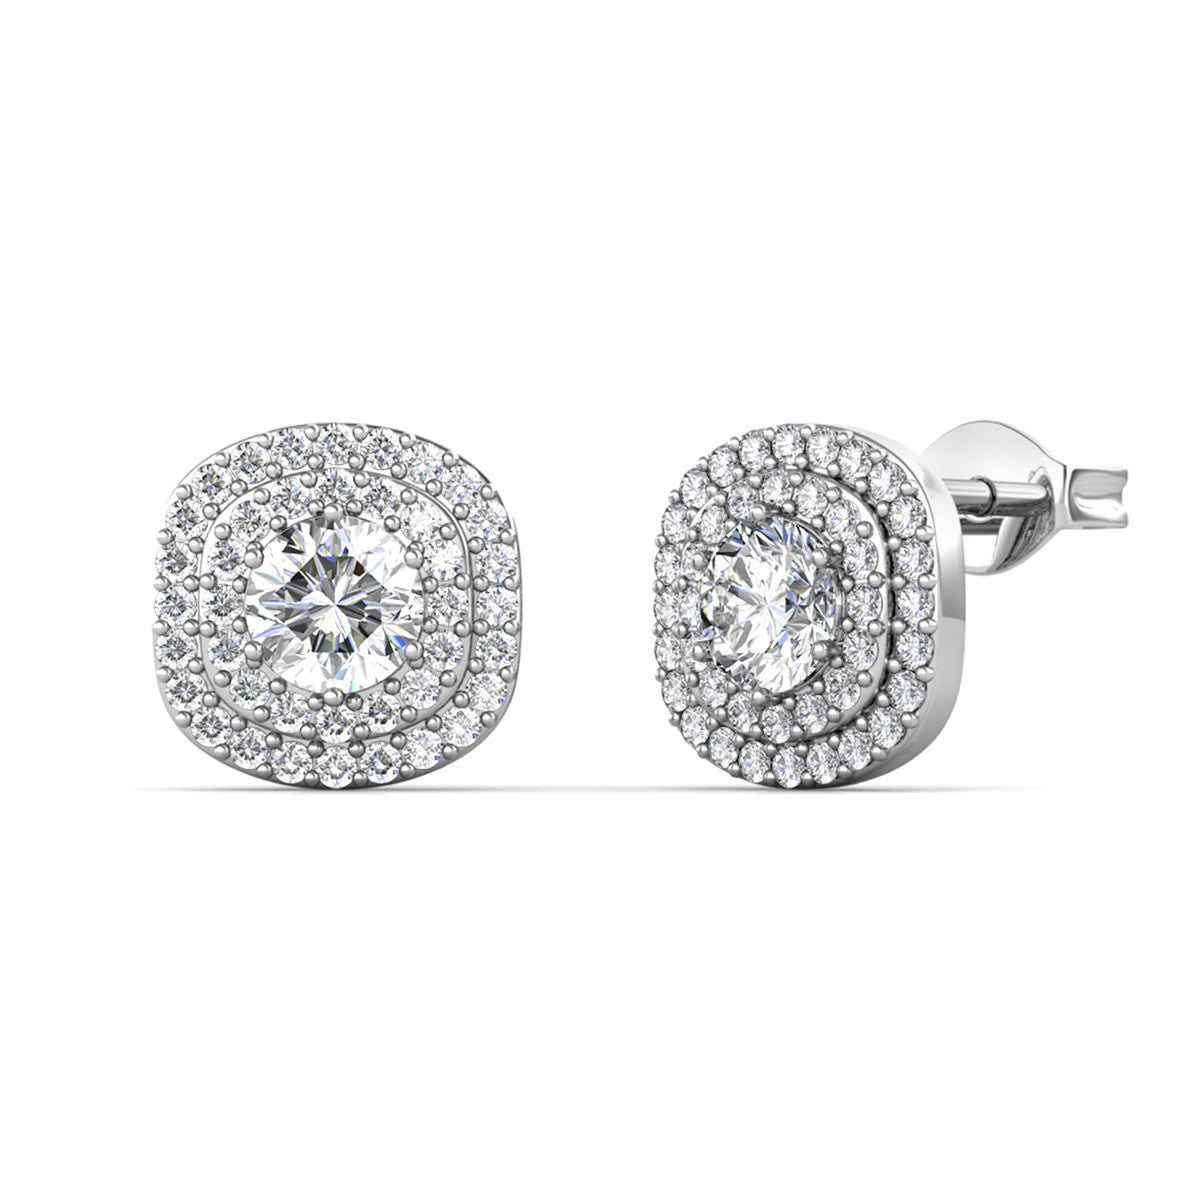 Moissanite by Cate & Chloe Lucy Sterling Silver Stud Earrings with Moissanite Crystals